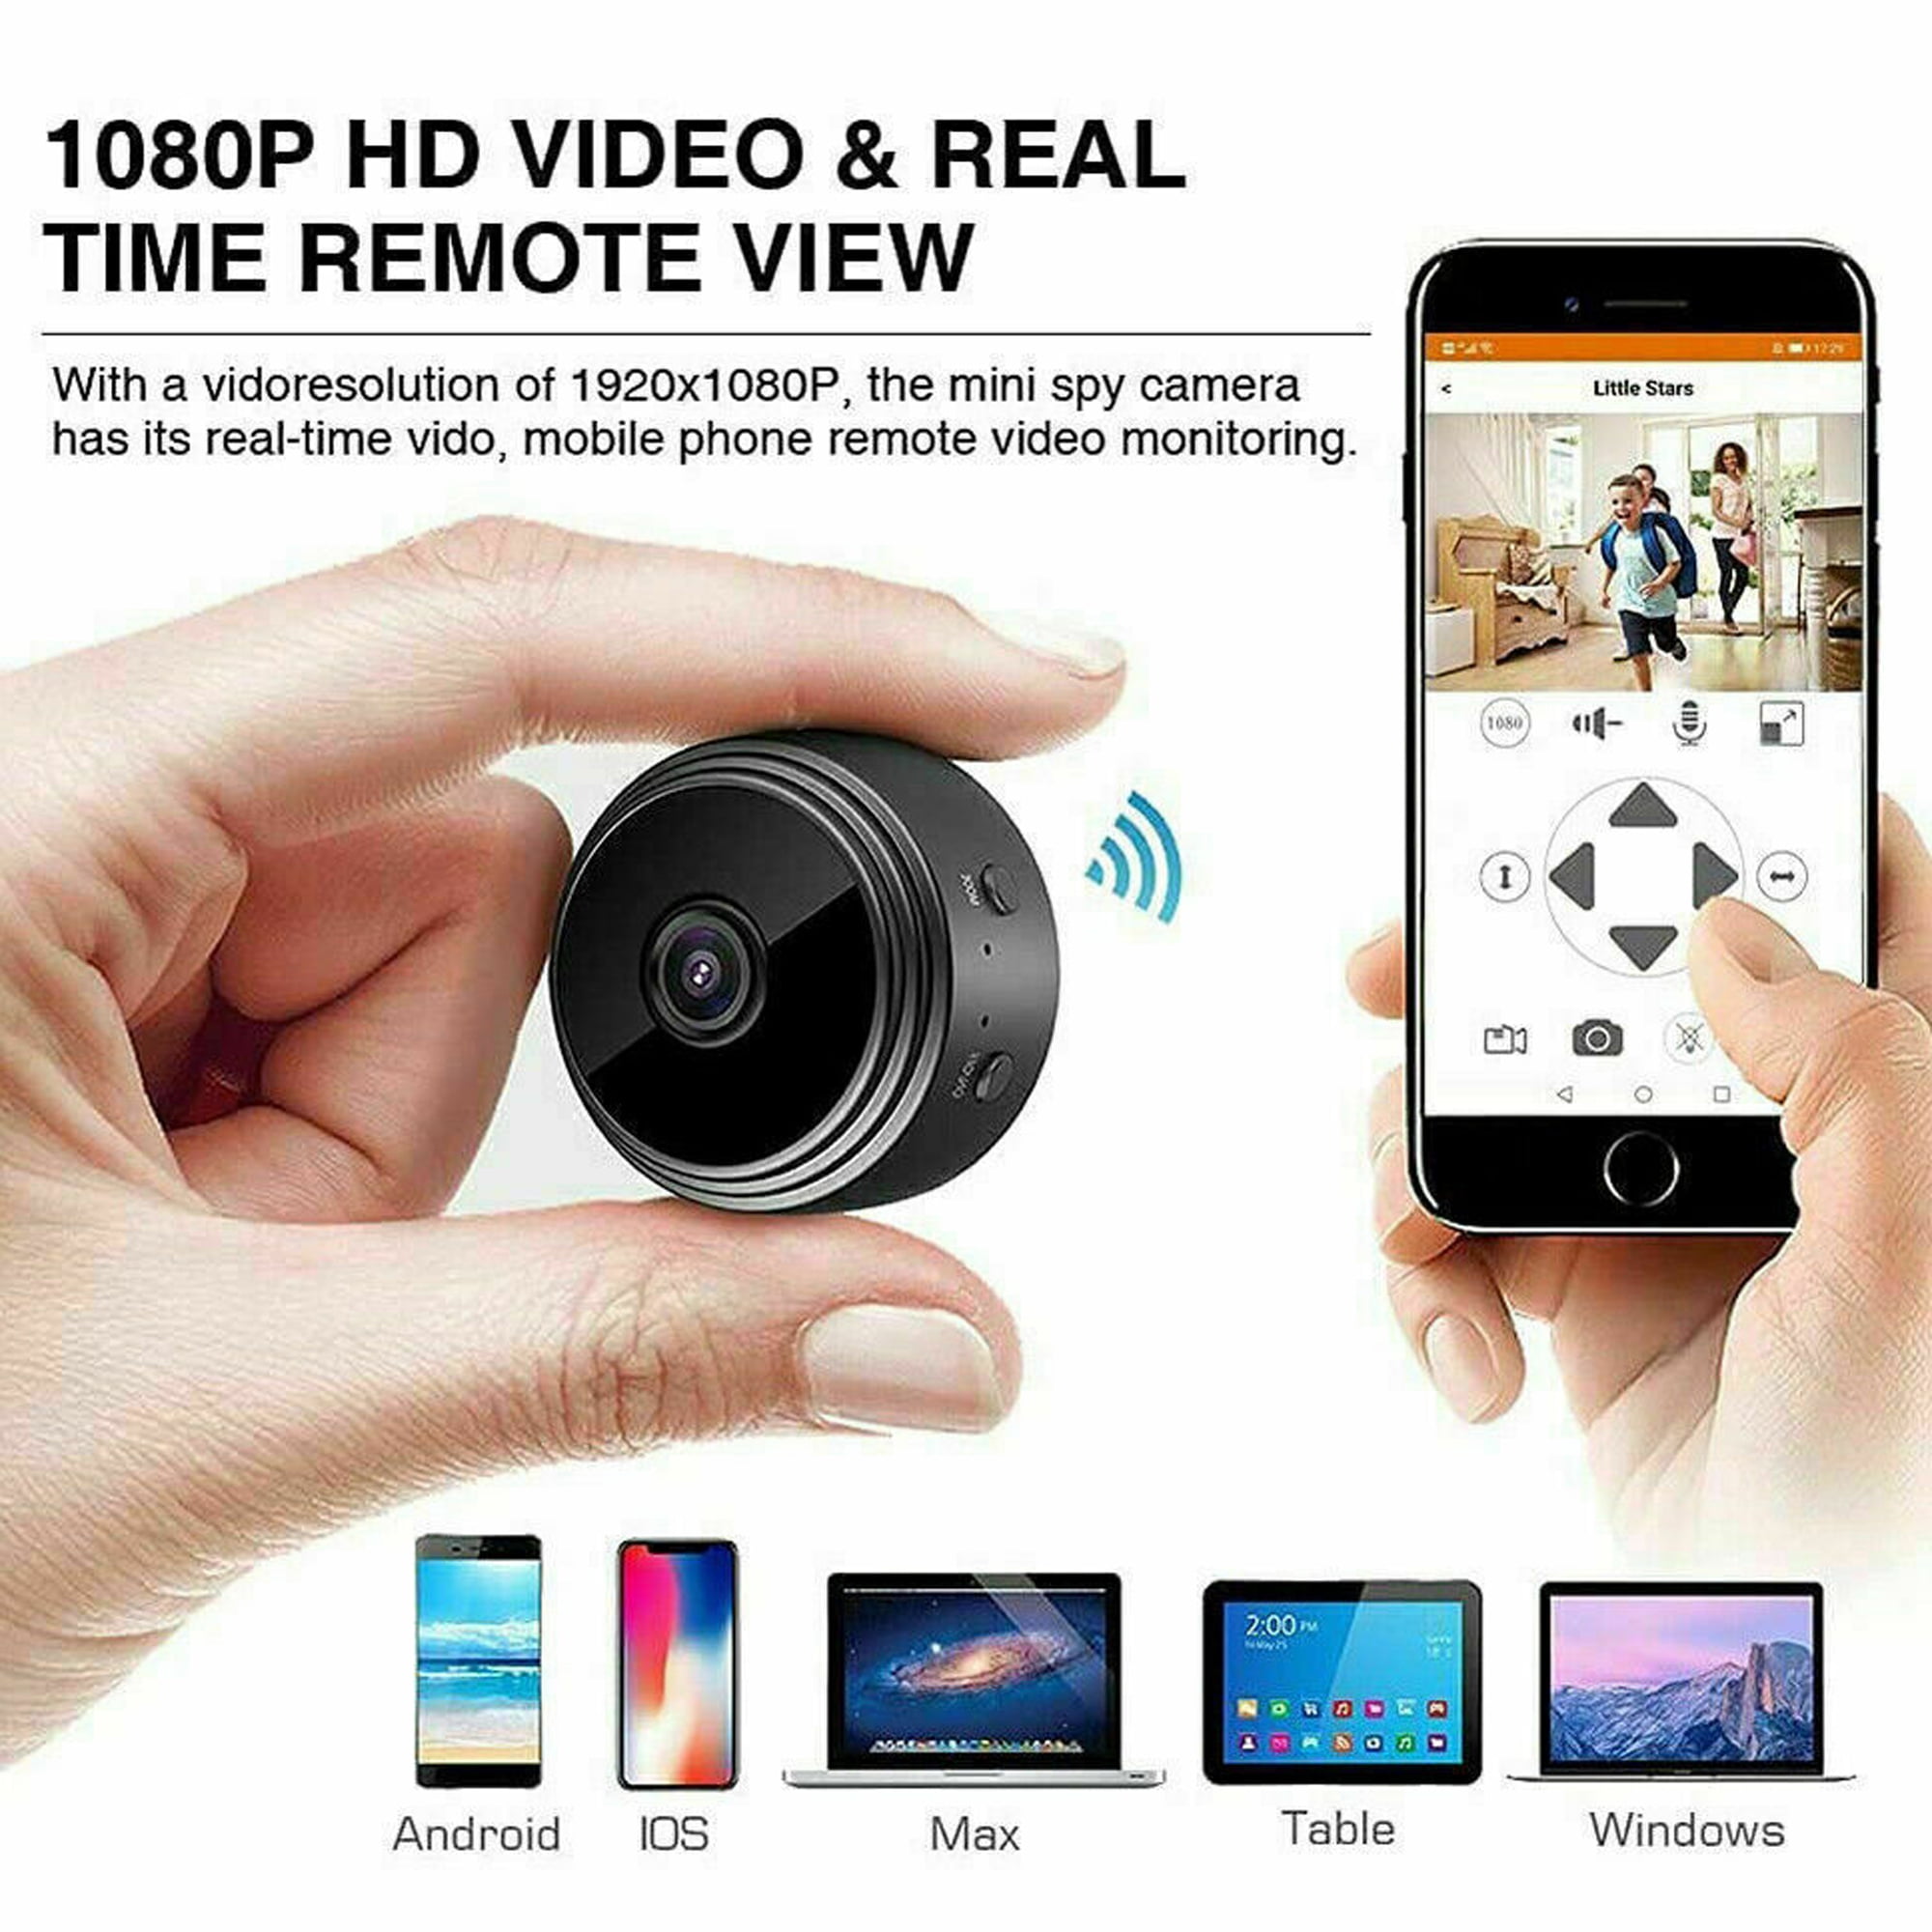 Mini wifi camera remote control 1080p hd webcam with infrared night vision  for business